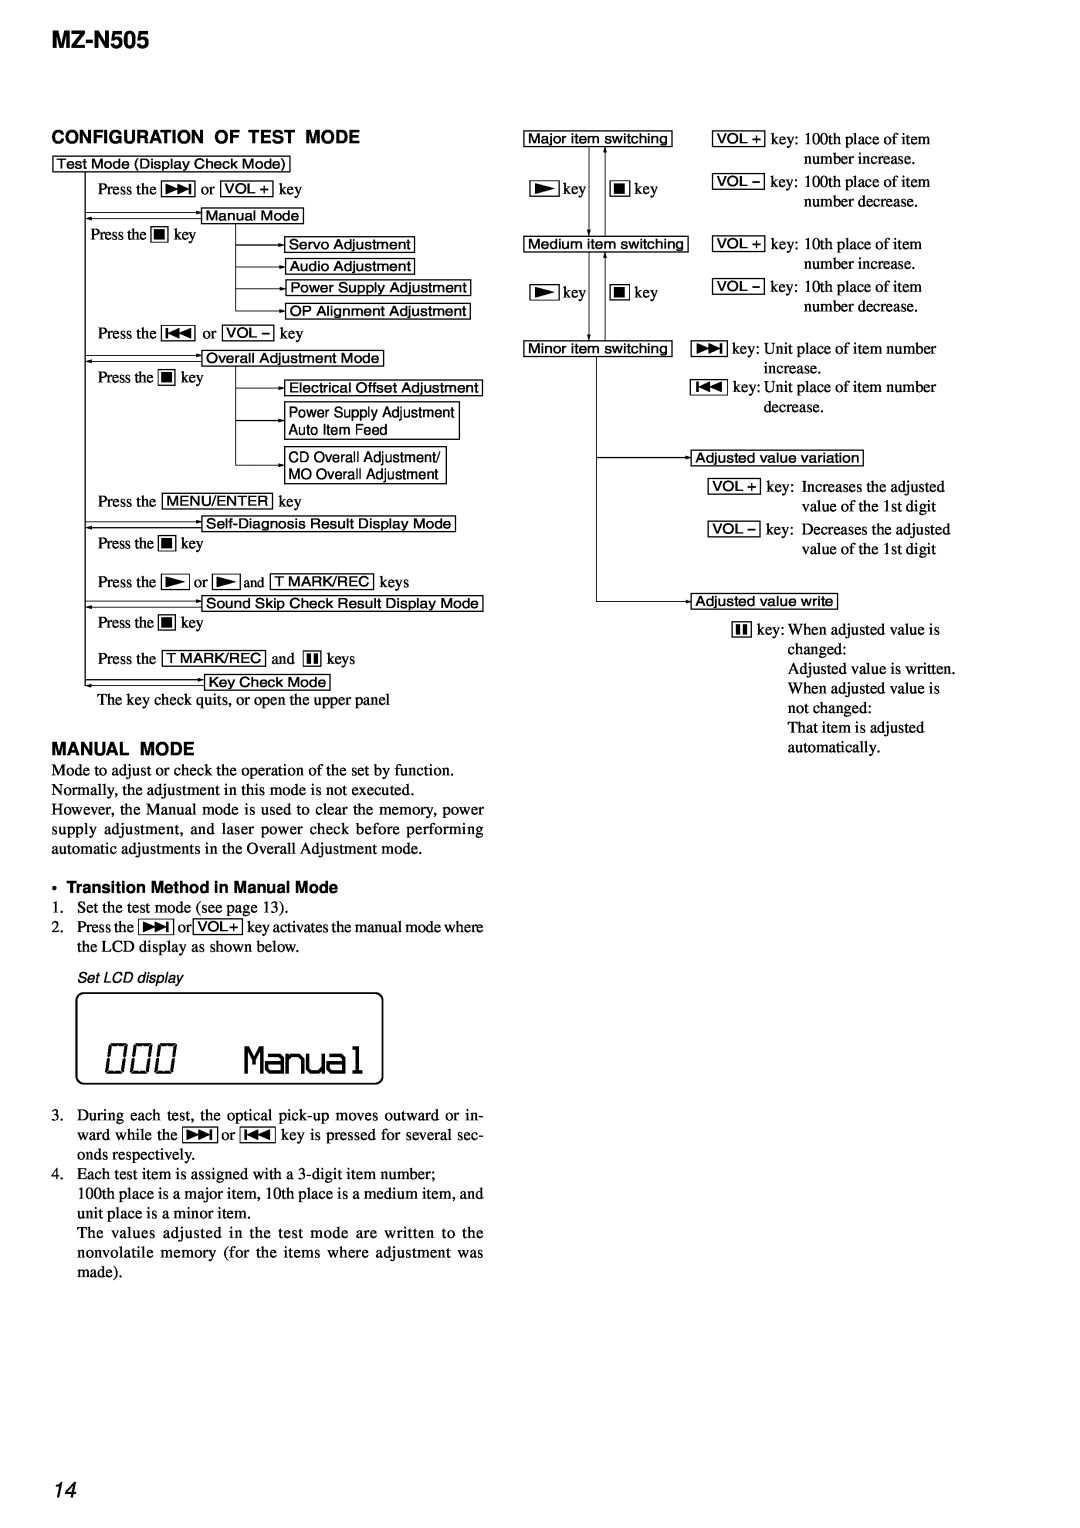 Sony MZ-N505 service manual 000Manual, Configuration Of Test Mode, Manual Mode 